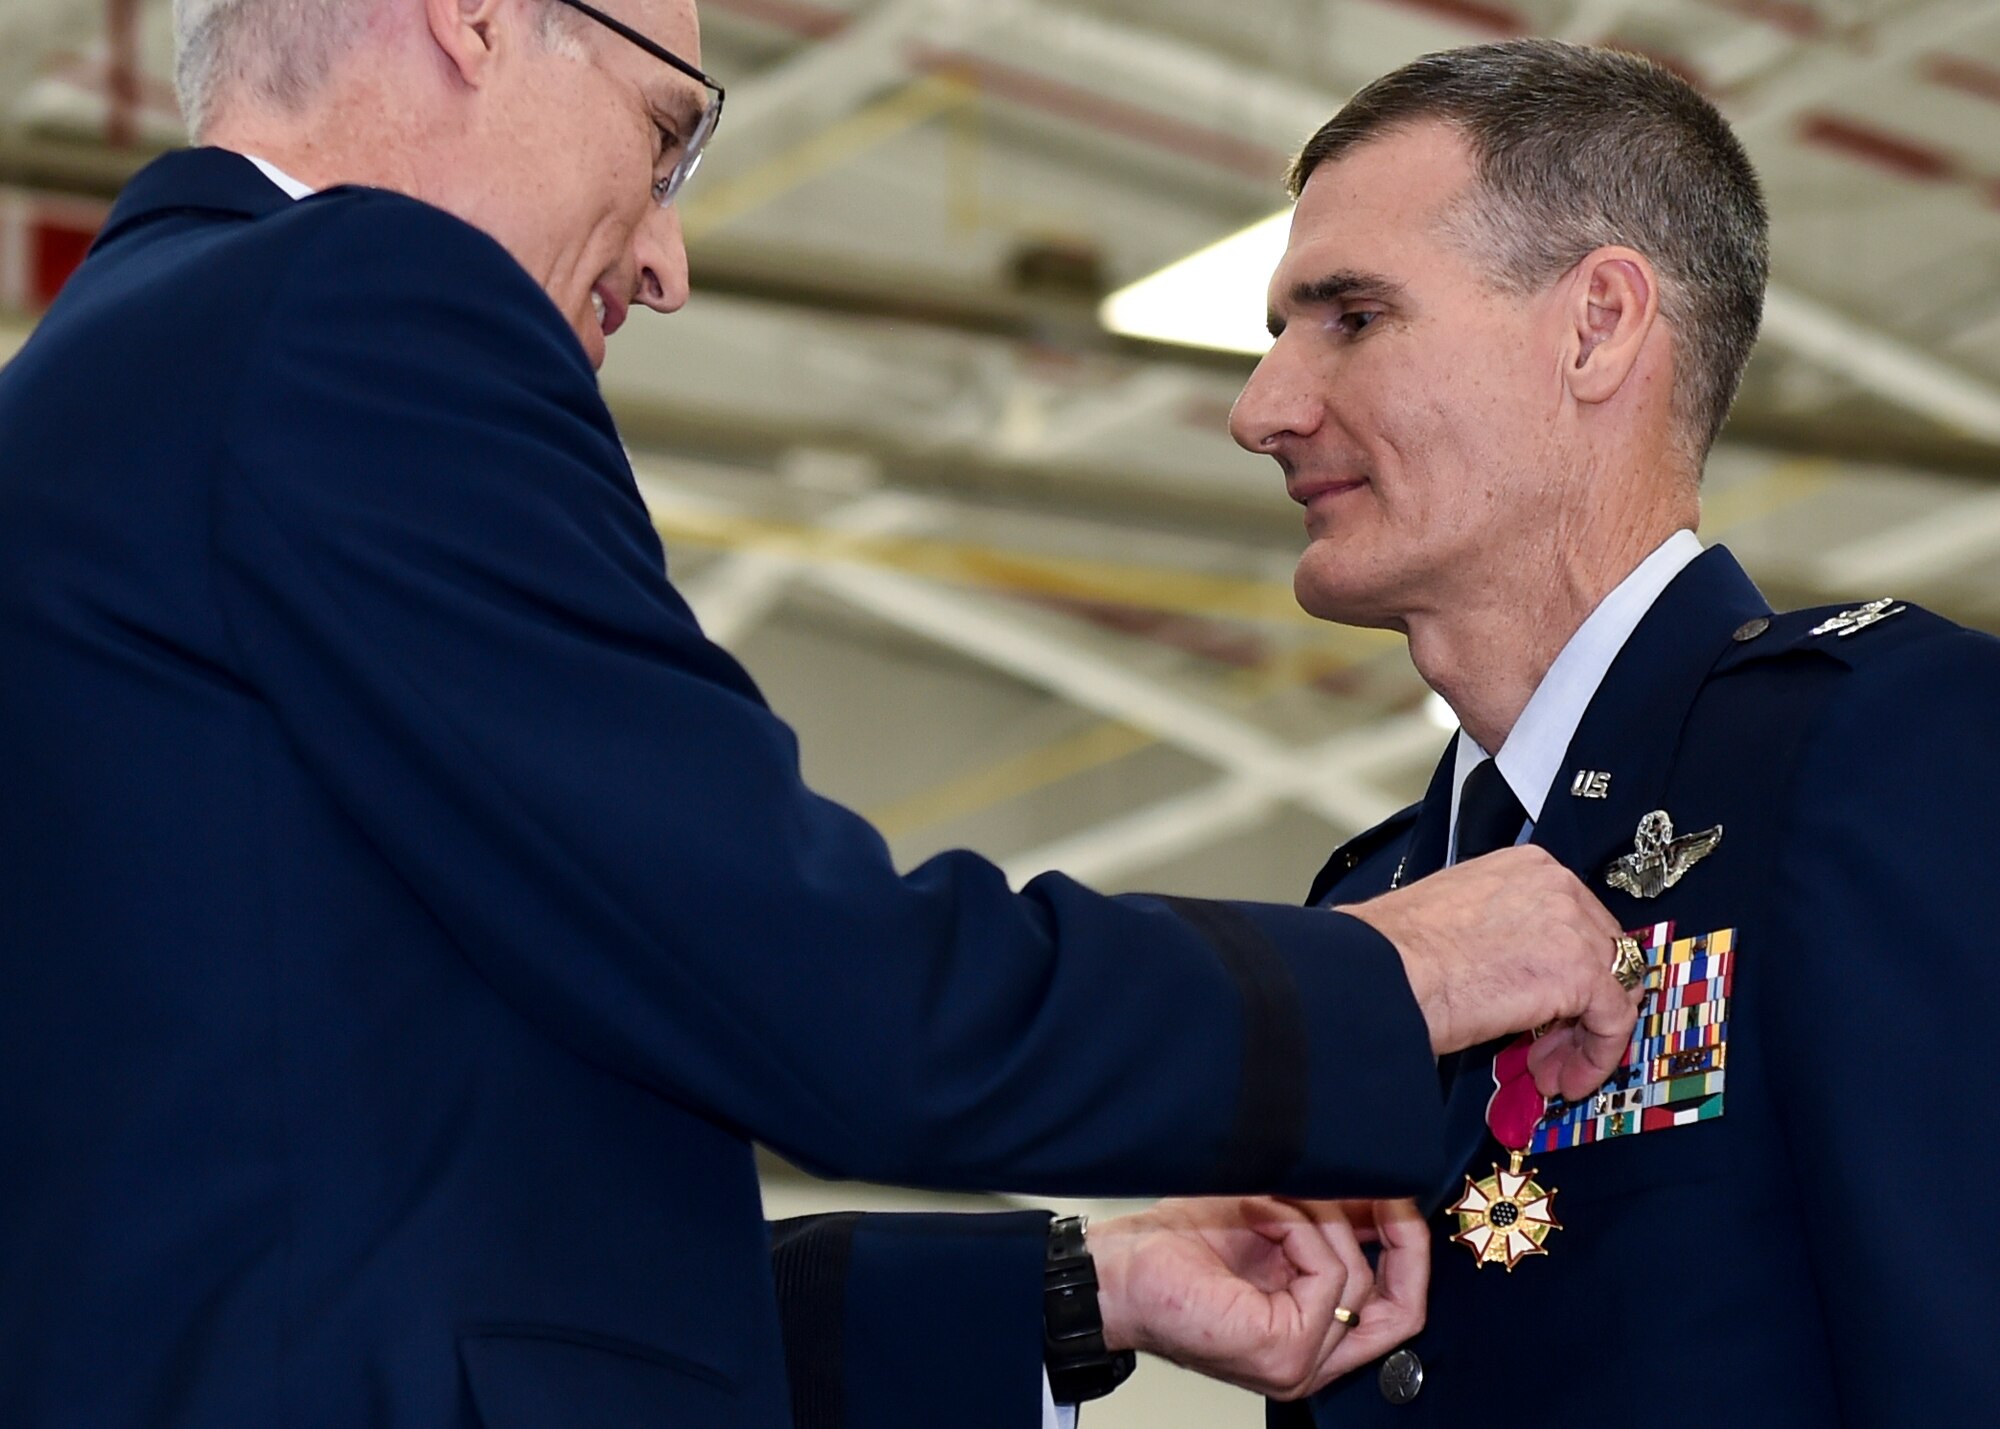 Col. Joseph Janik, Vice Commander of the 910th Airlift Wing since November, 2017, assumed command of the 910th AW during the 910th AW’s change of command ceremony on Feb. 9, 2019, at Youngstown Air Reserve Station.